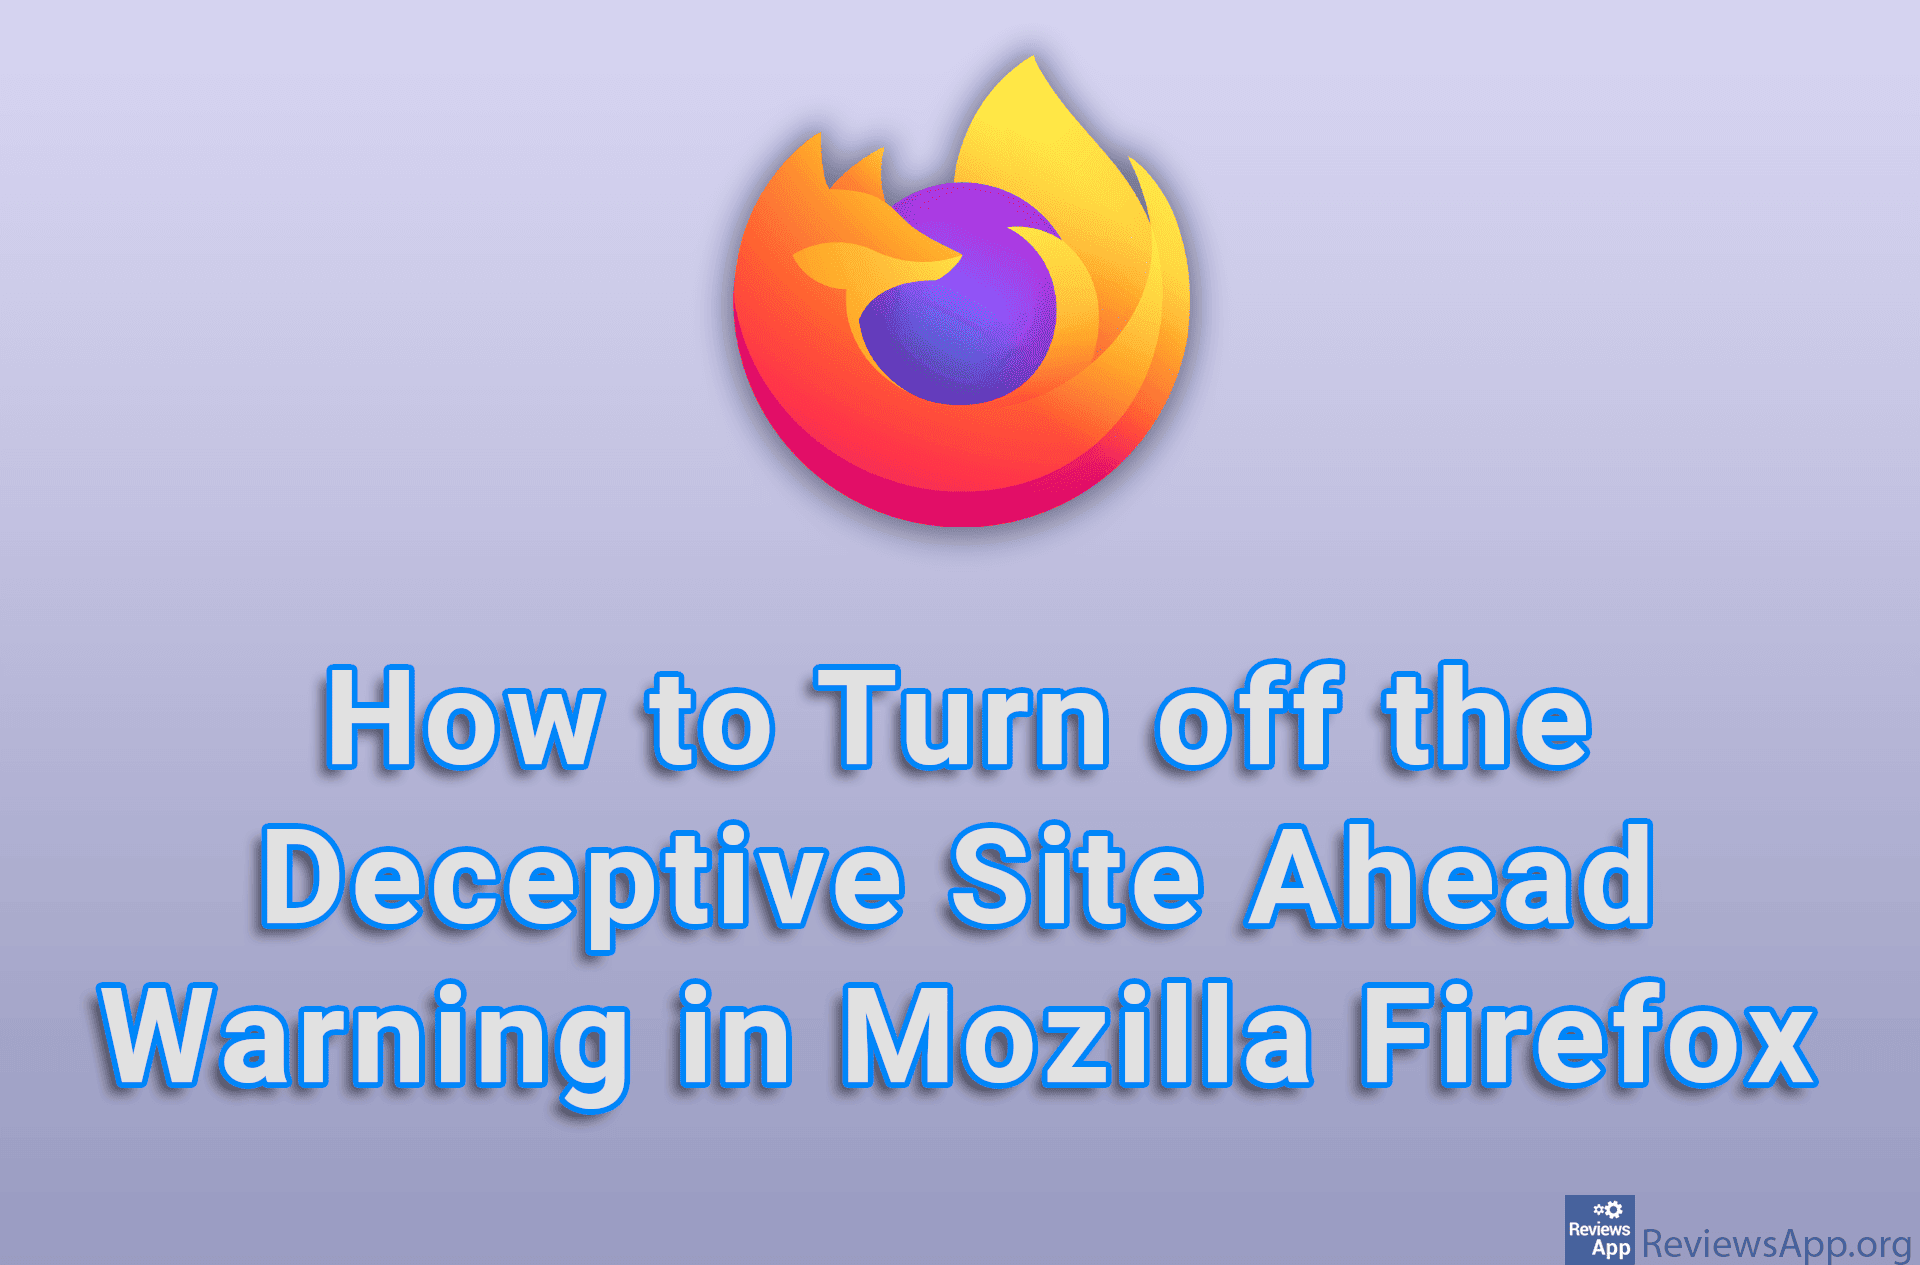 How to Turn off the Deceptive Site Ahead Warning in Mozilla Firefox